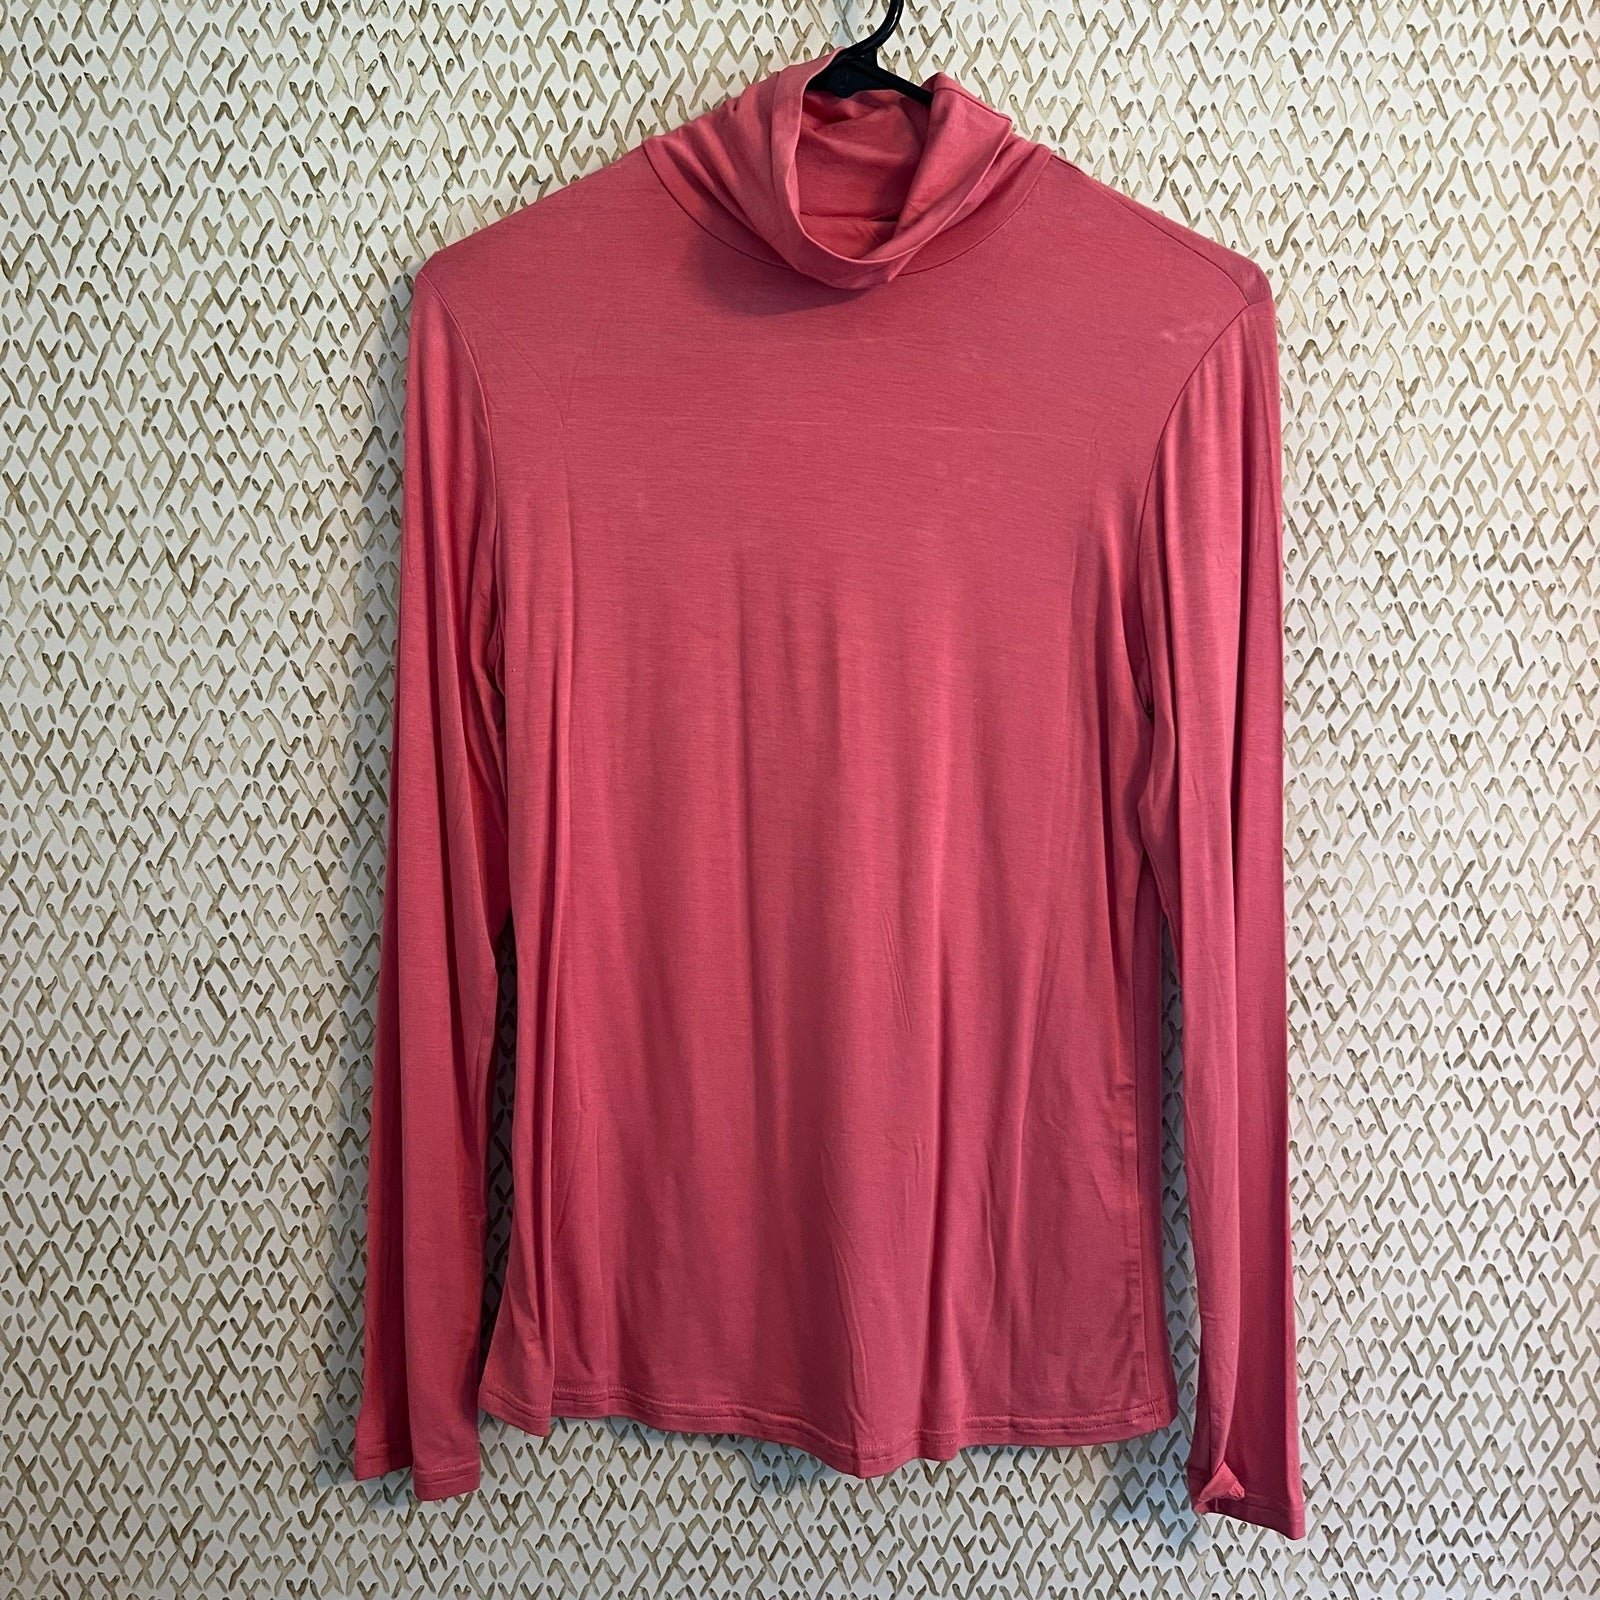 High quality Pink Turtle Neck Long Sleeve MA7HNEtTQ Hig